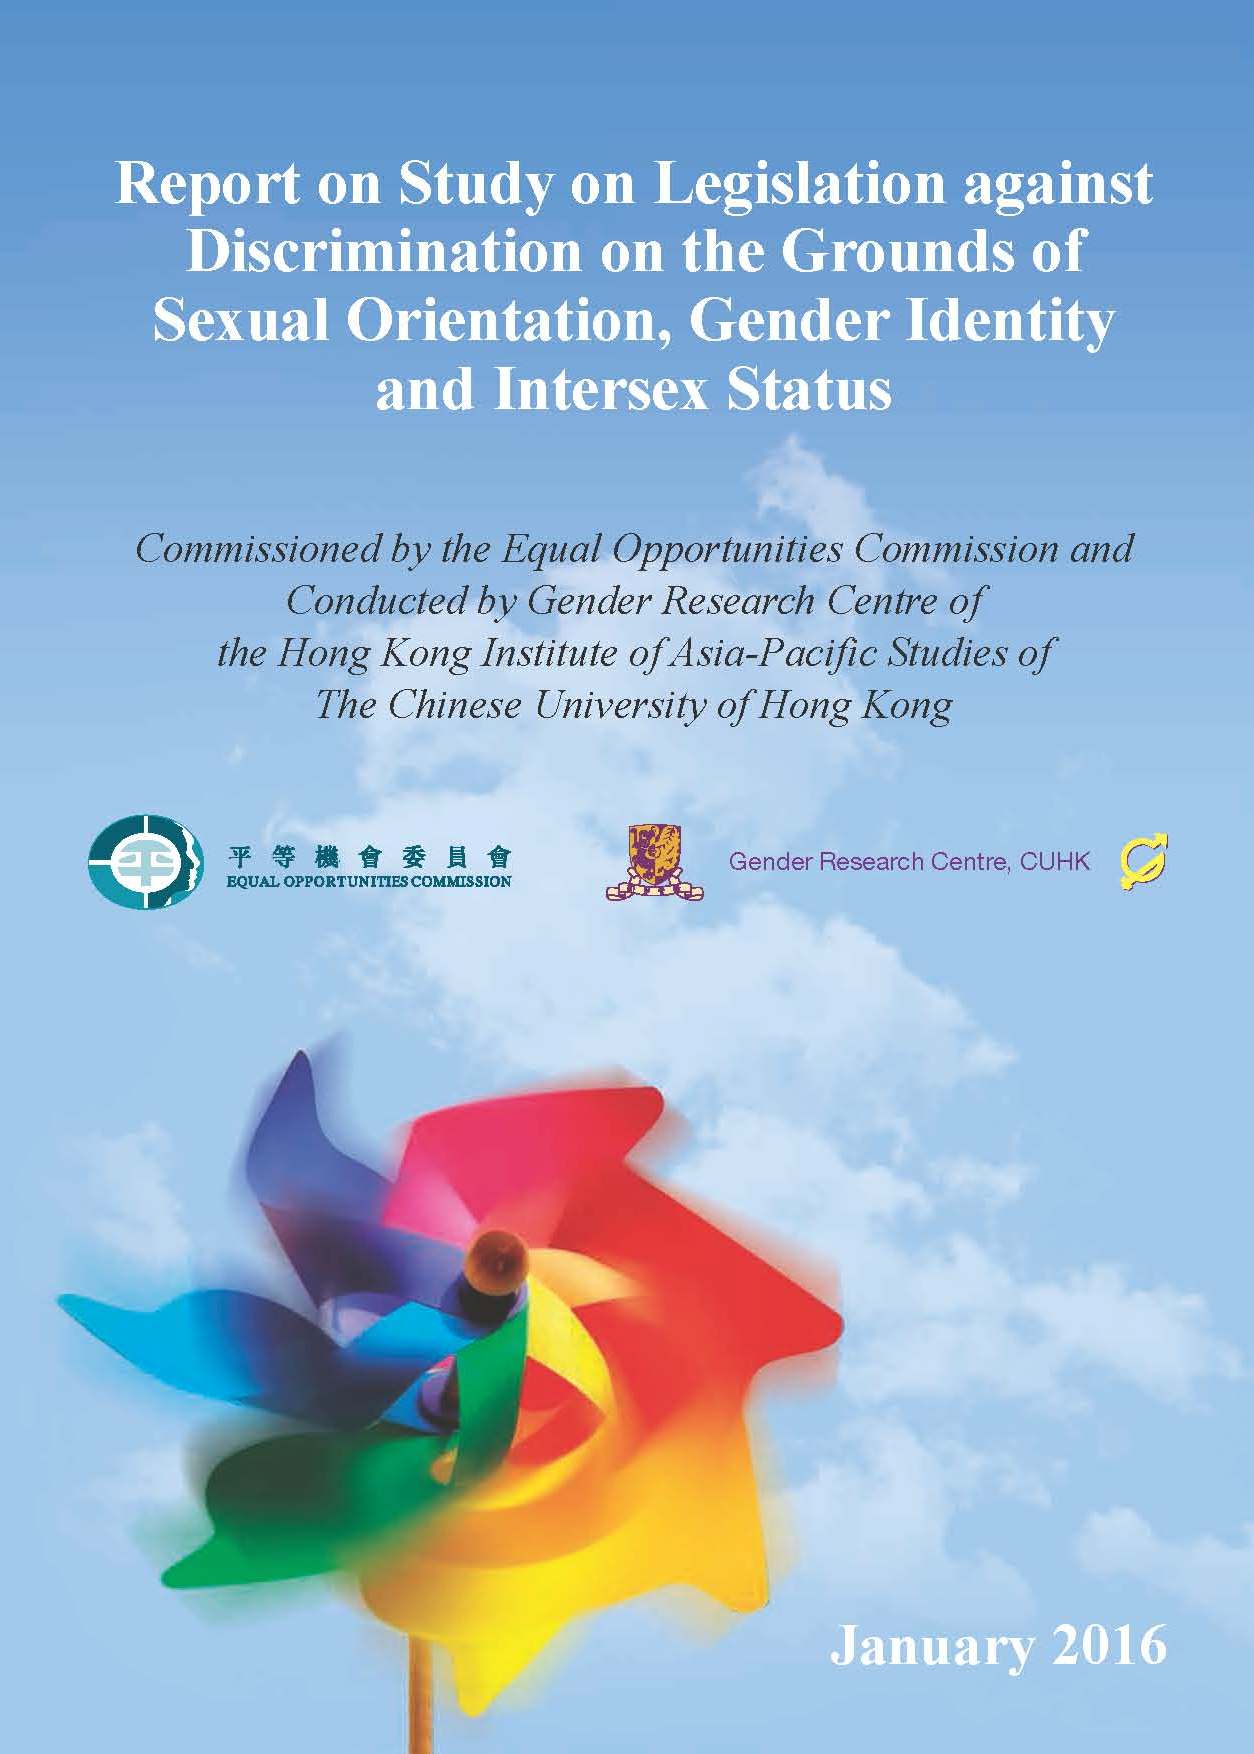 Cover of the Report on Study on Legislation against Discrimination on the Grounds of Sexual Orientation, Gender Identity and Intersex Status